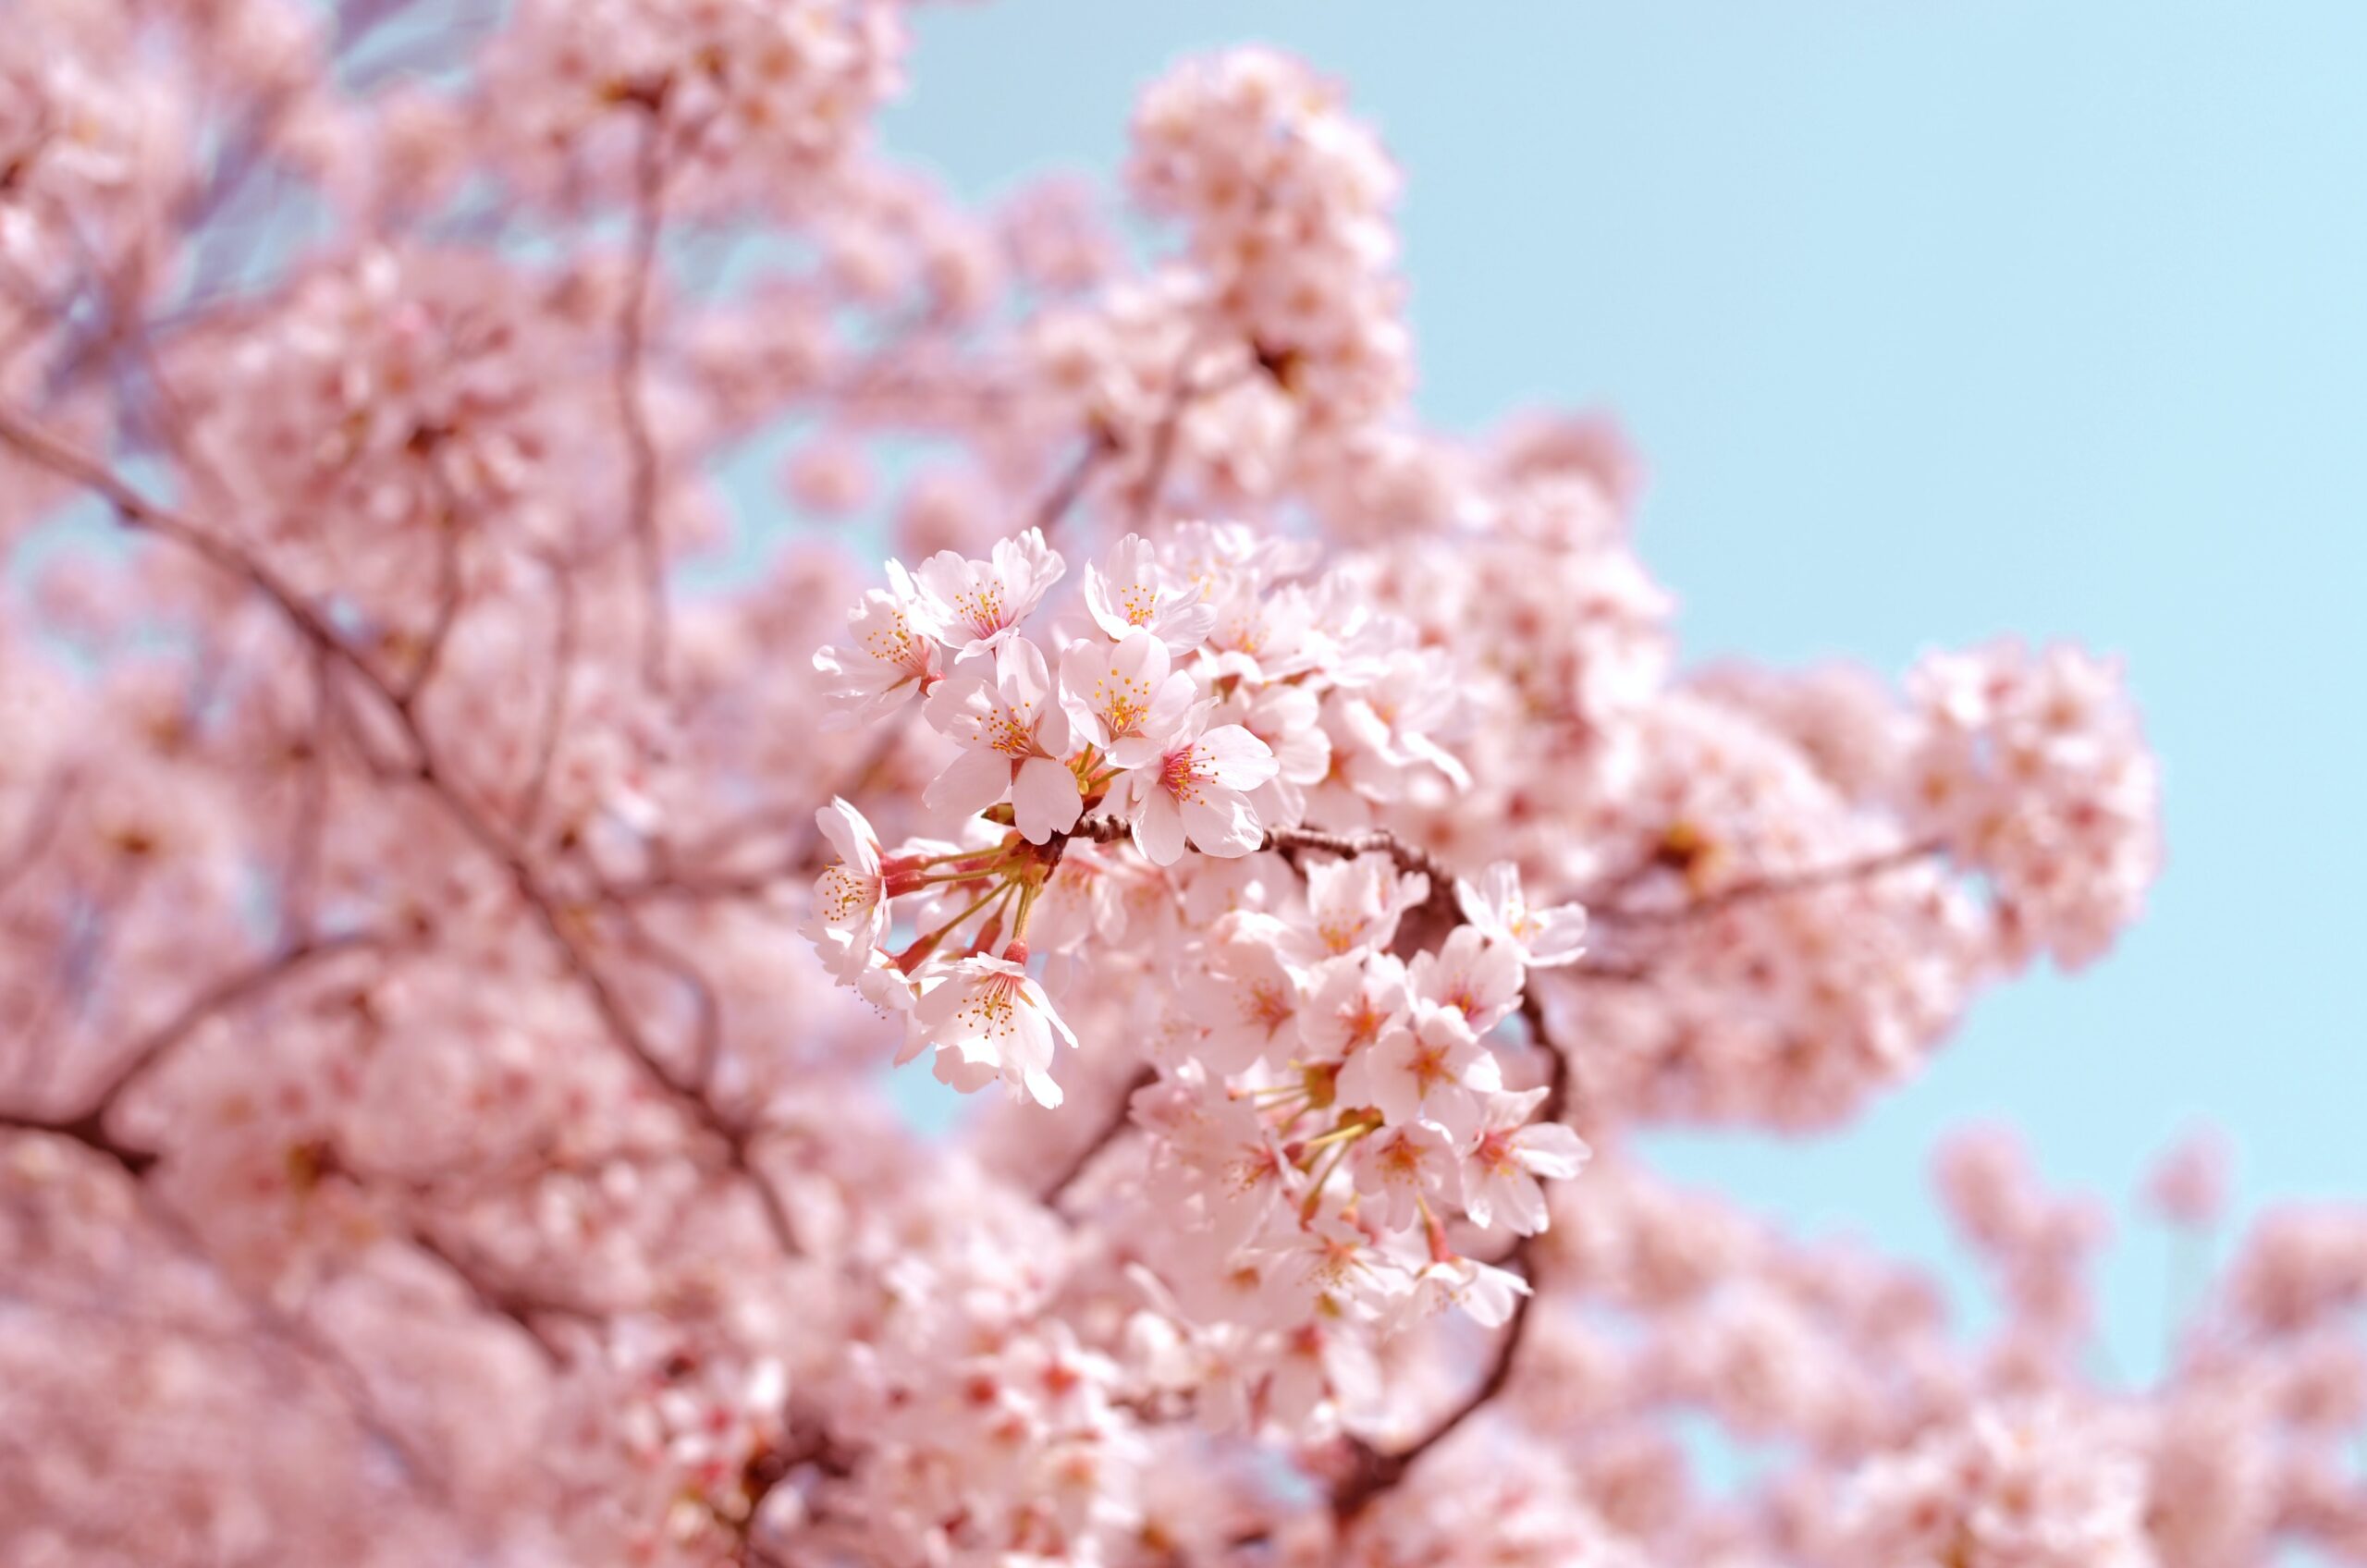 The Japanese Cherry Blossoms are an important cultural feature of its home country. 
pictured: A branch of warm pink cherry blossom flowers with a sky backdrop 